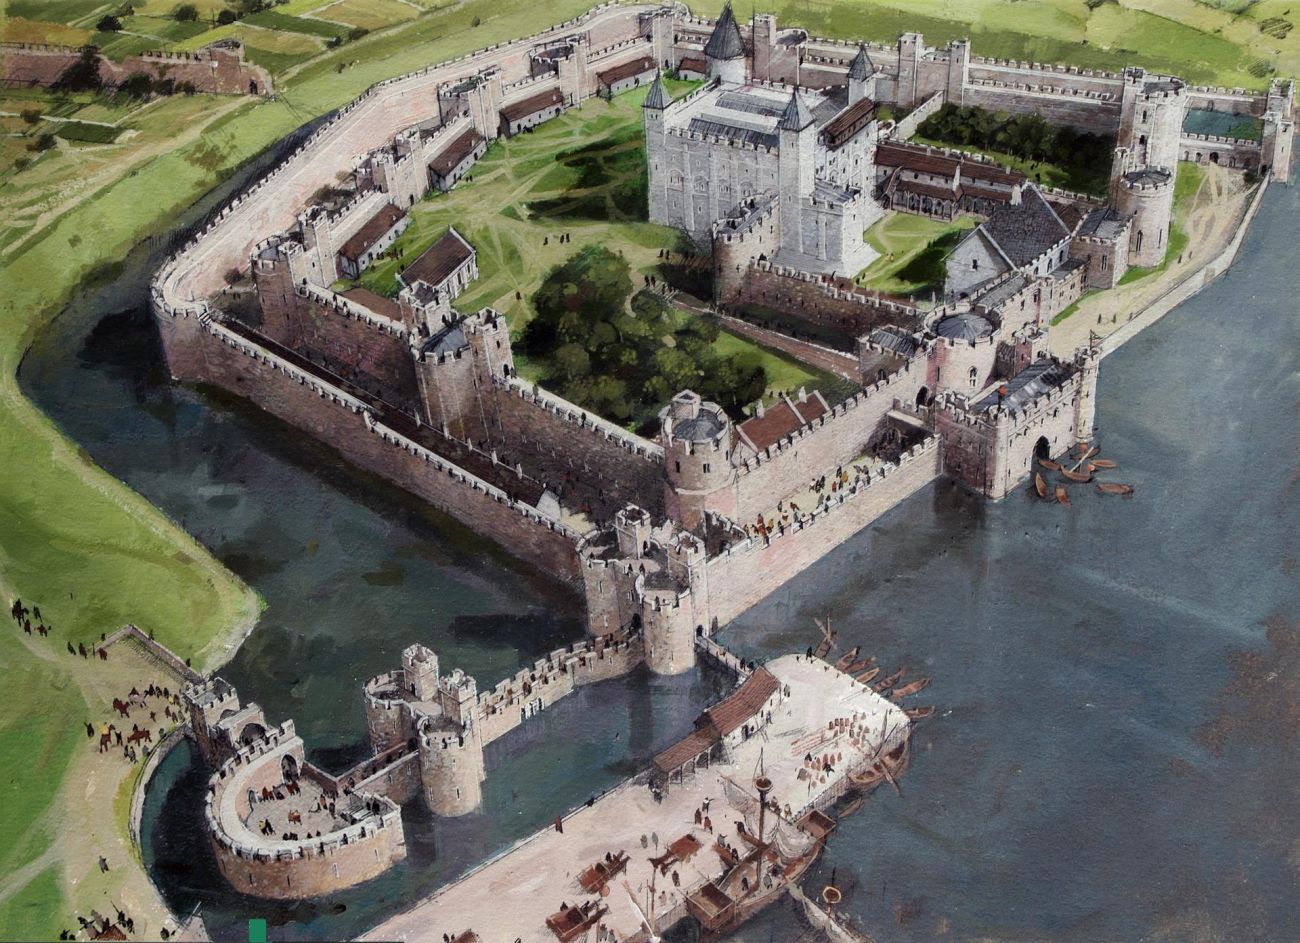 An artist's impression of the what the Tower of London looked like in the year 1300